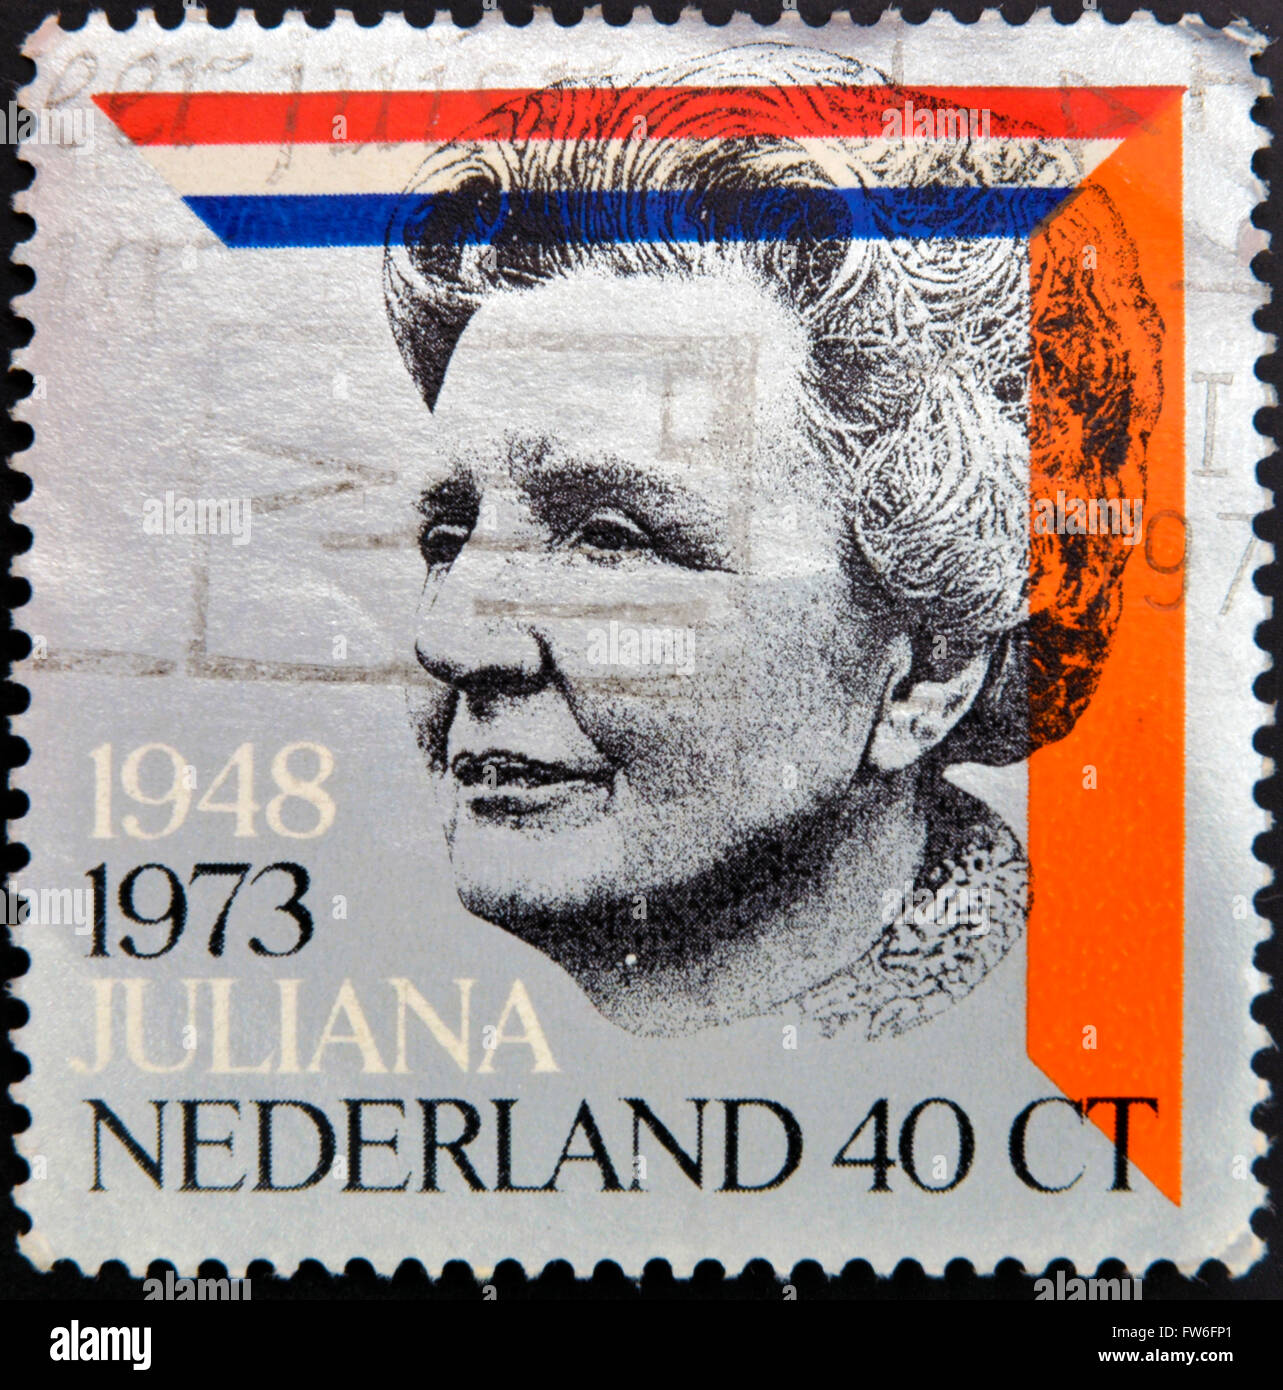 HOLLAND - CIRCA 1973: A stamp printed in the Netherlands for the silver jubilee of the reign of Queen Juliana, circa 1973 Stock Photo